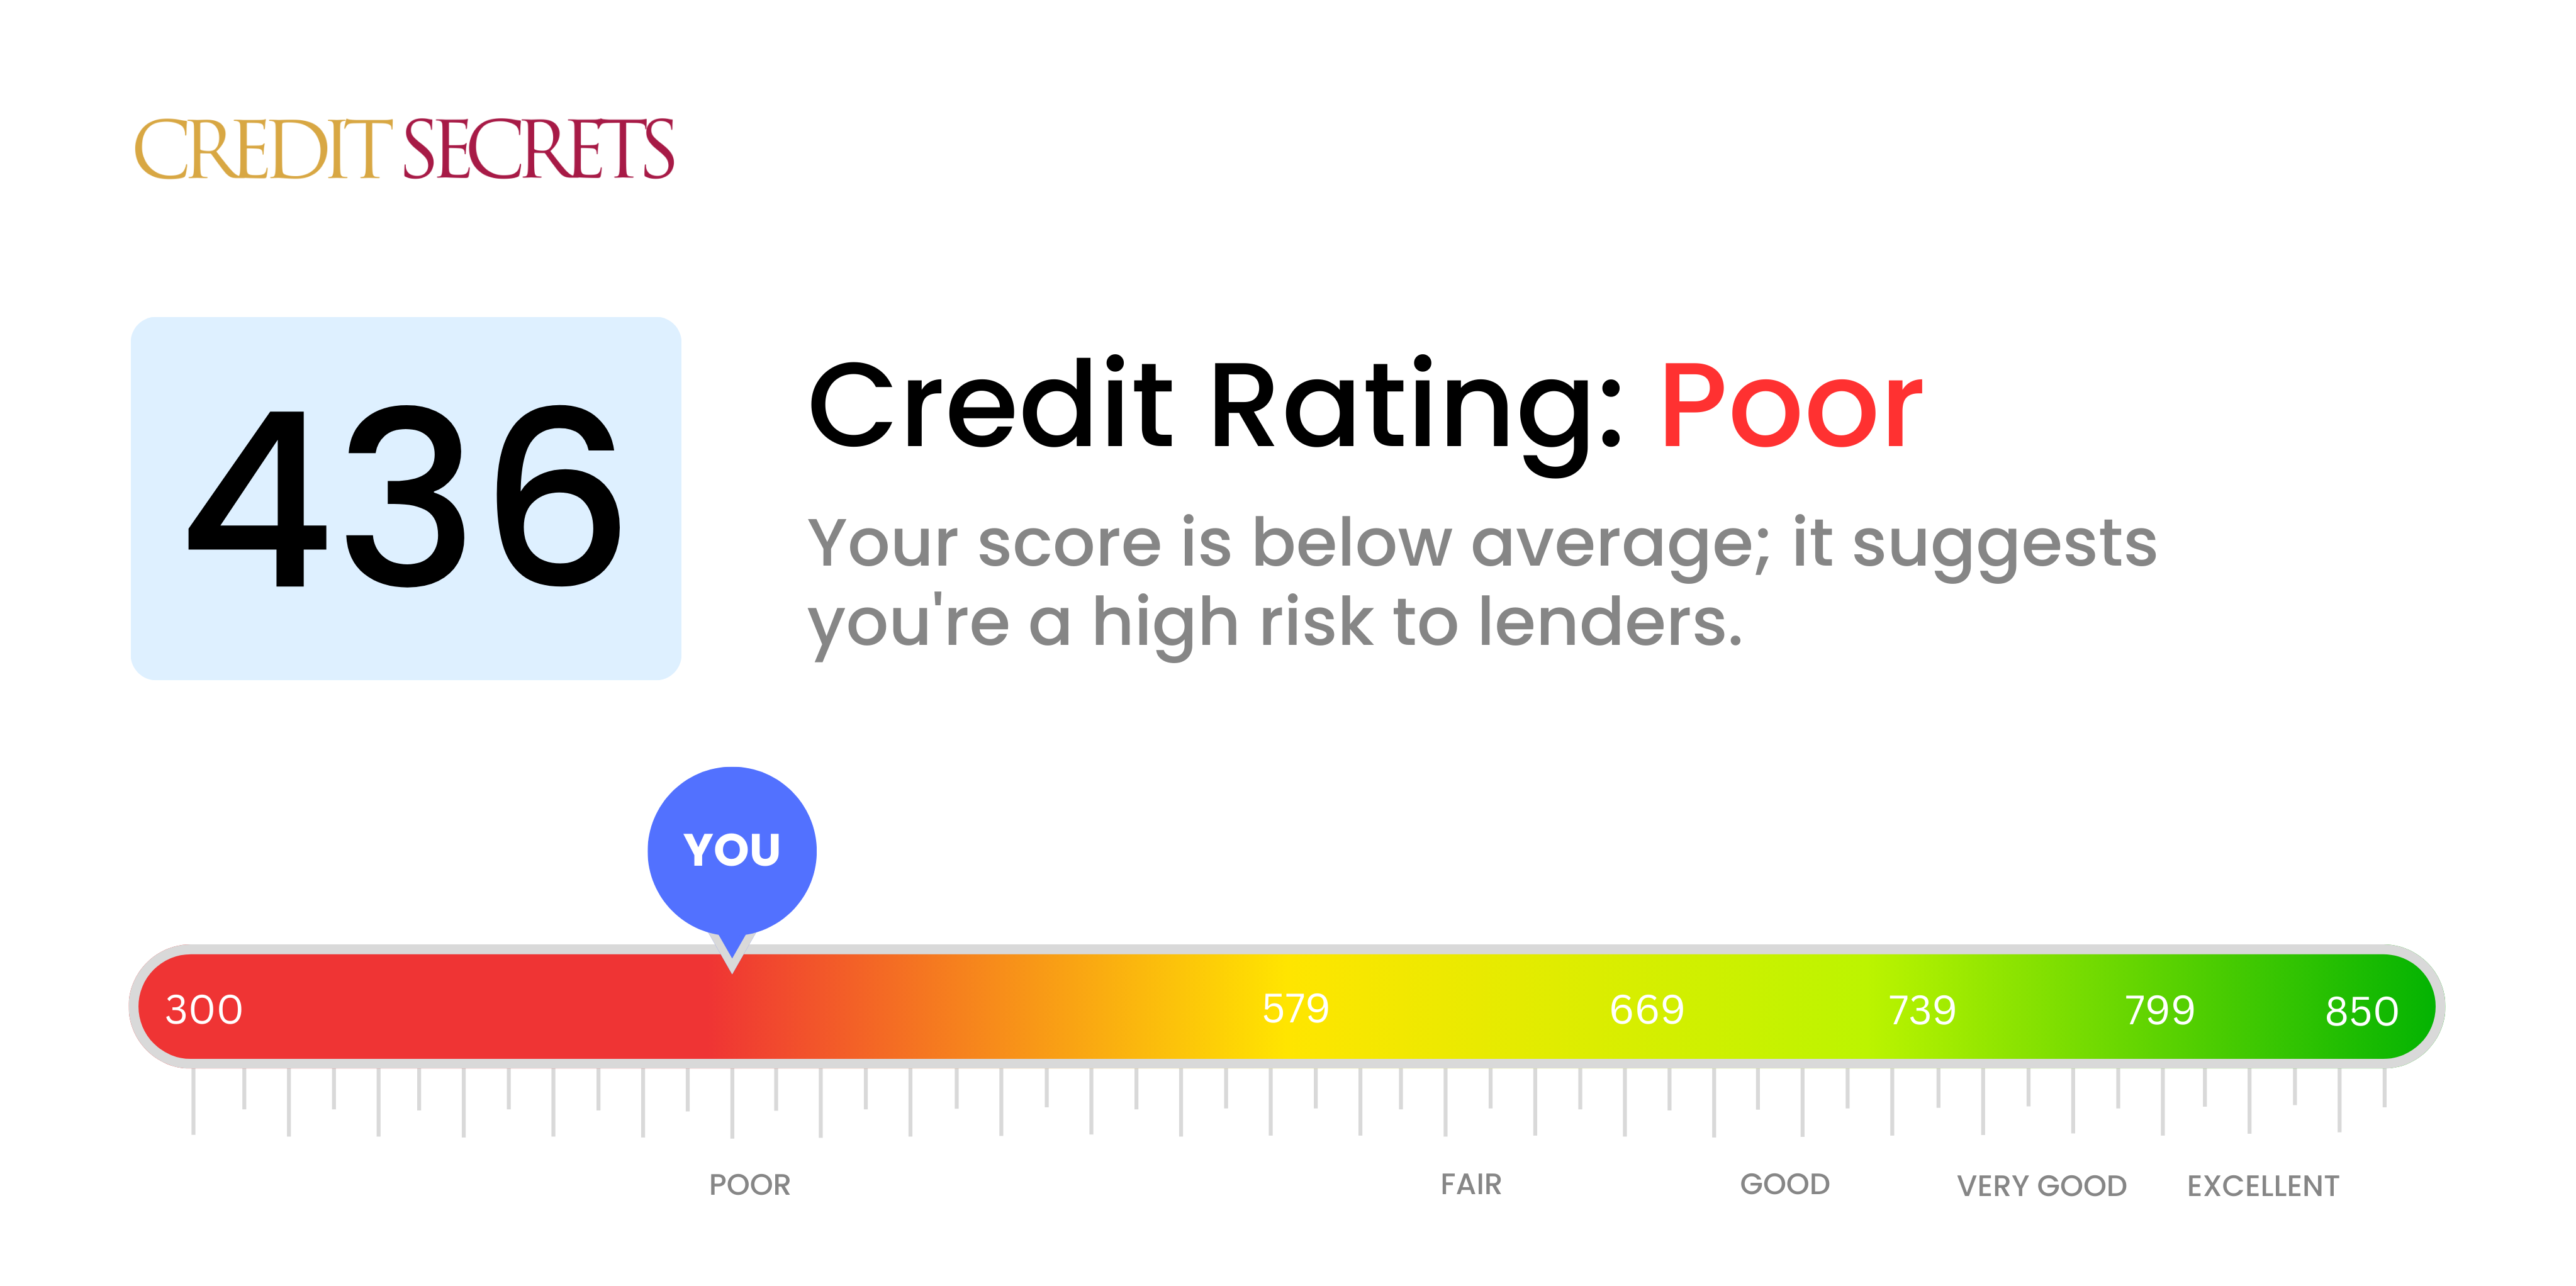 Is 436 a good credit score?